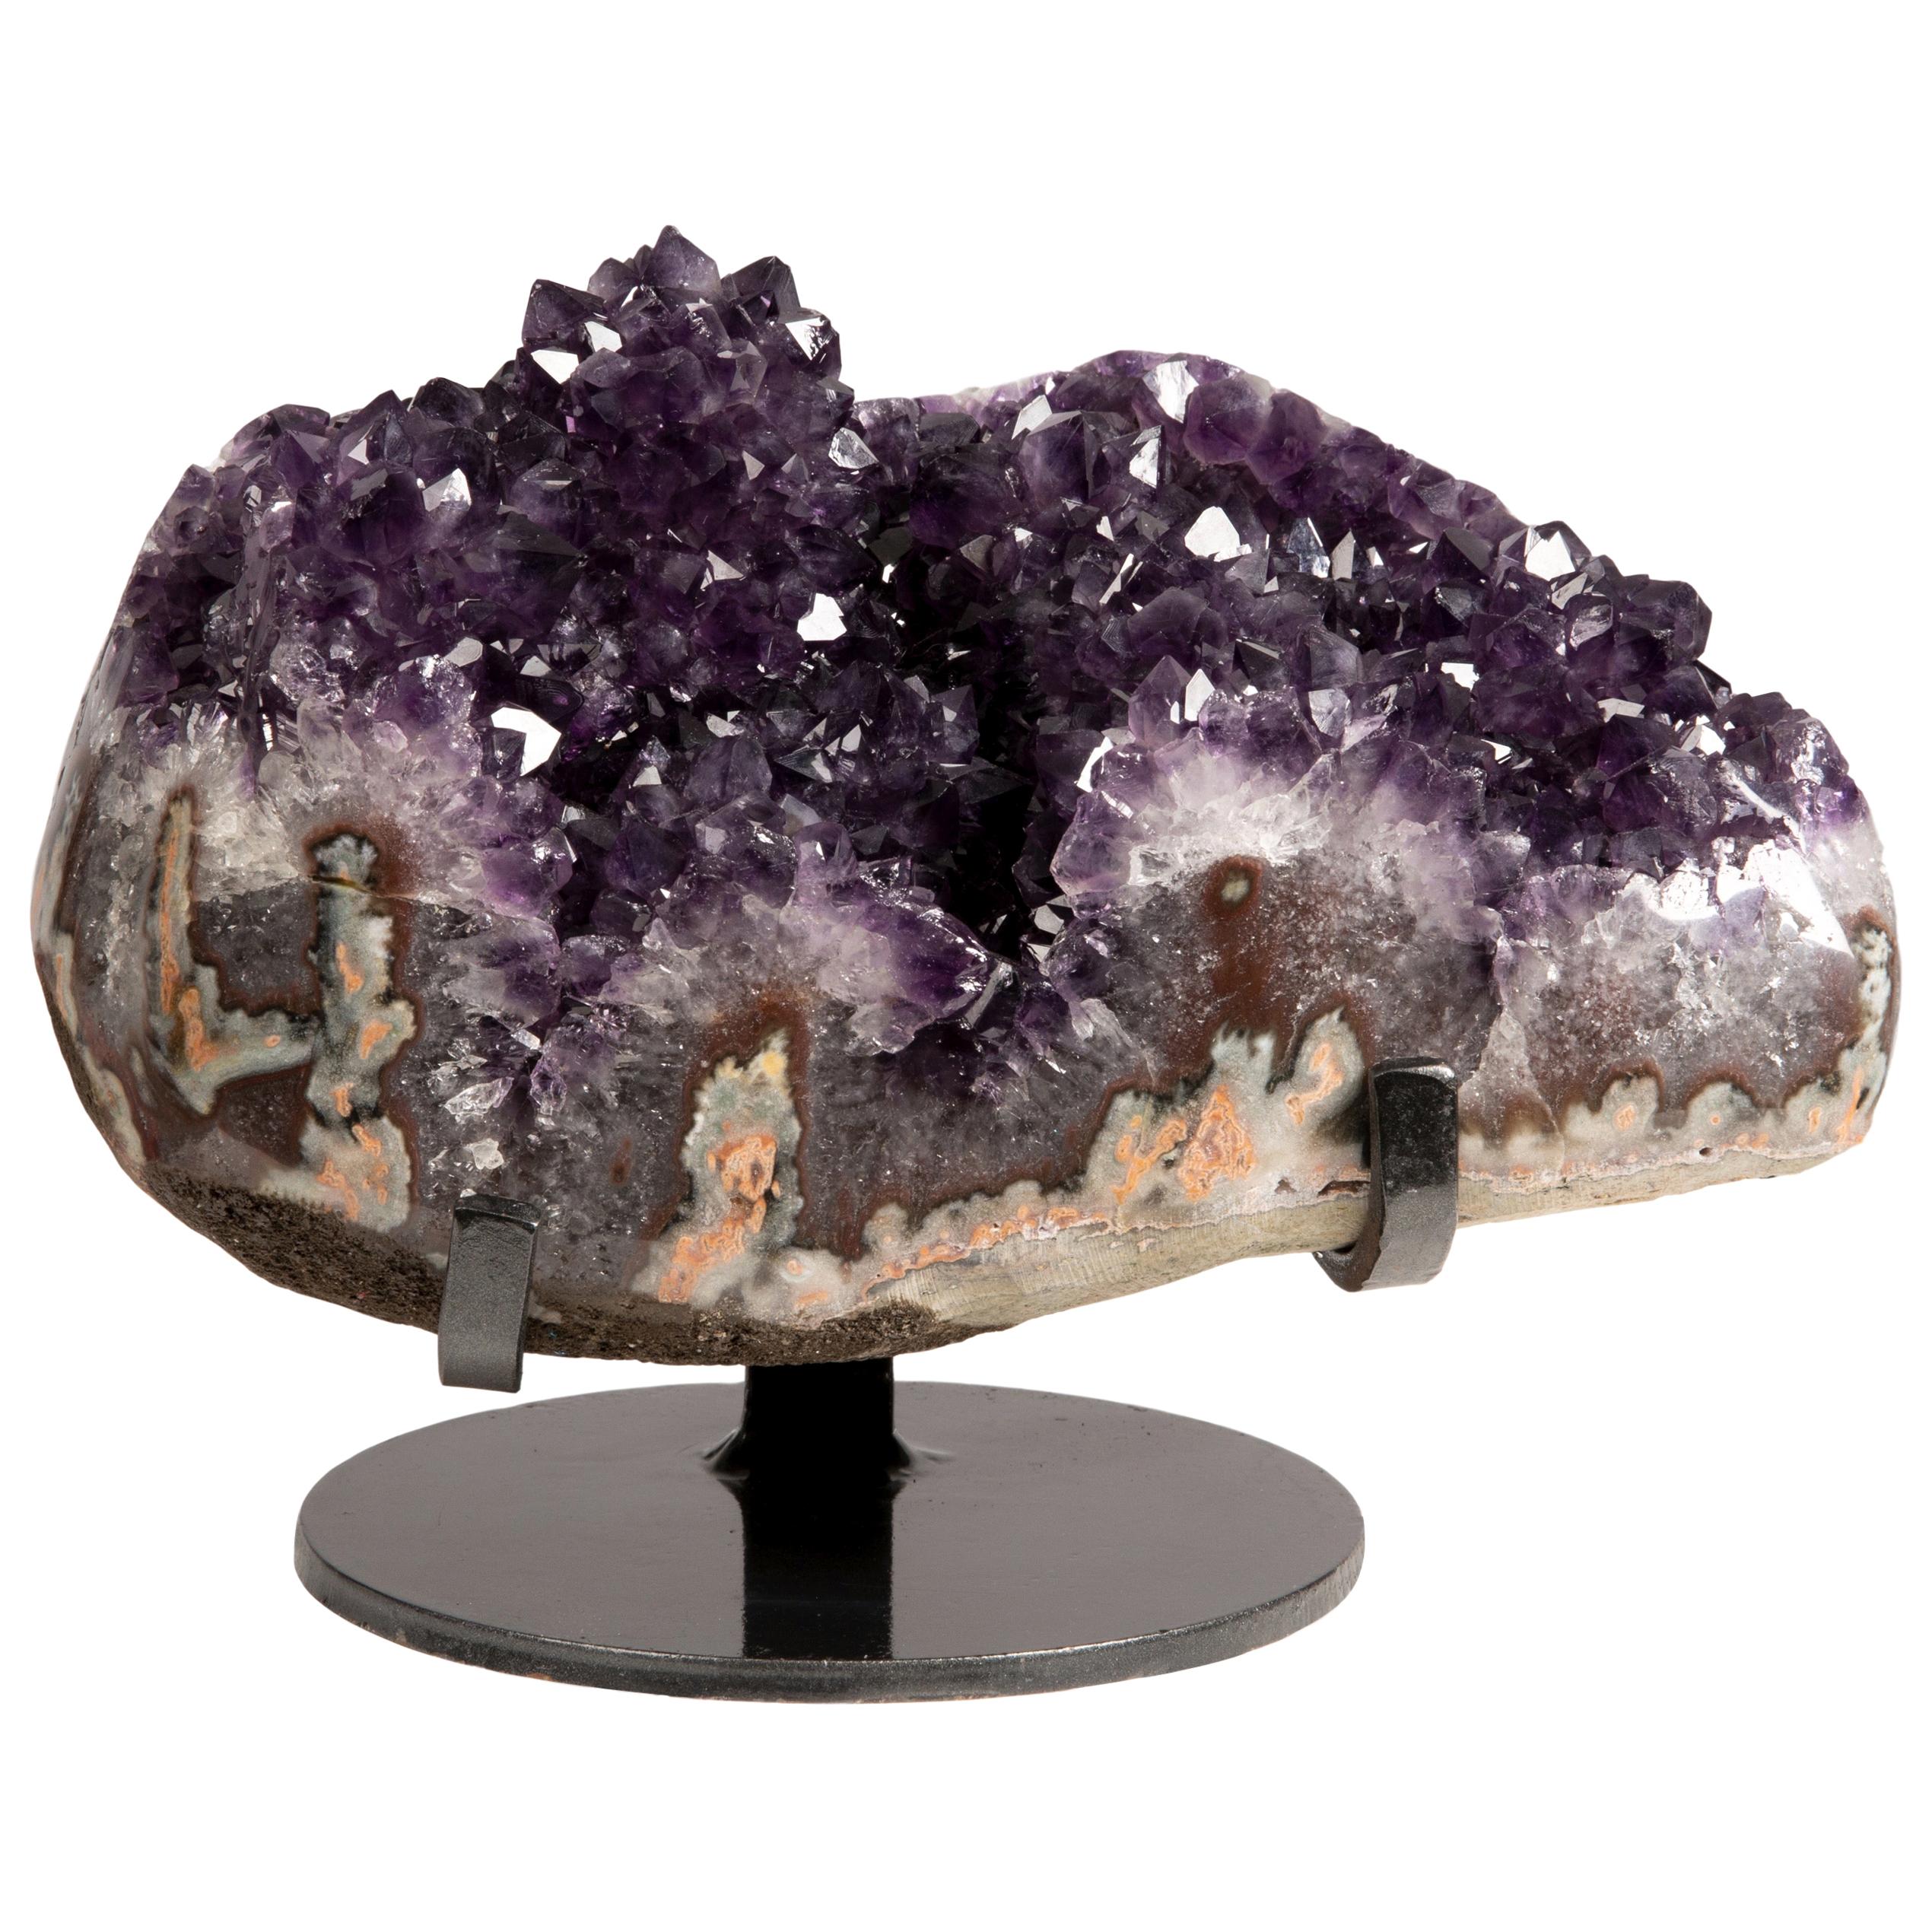 Small Cluster of Amethyst Stalactite Formations - Mineral Display piece For Sale